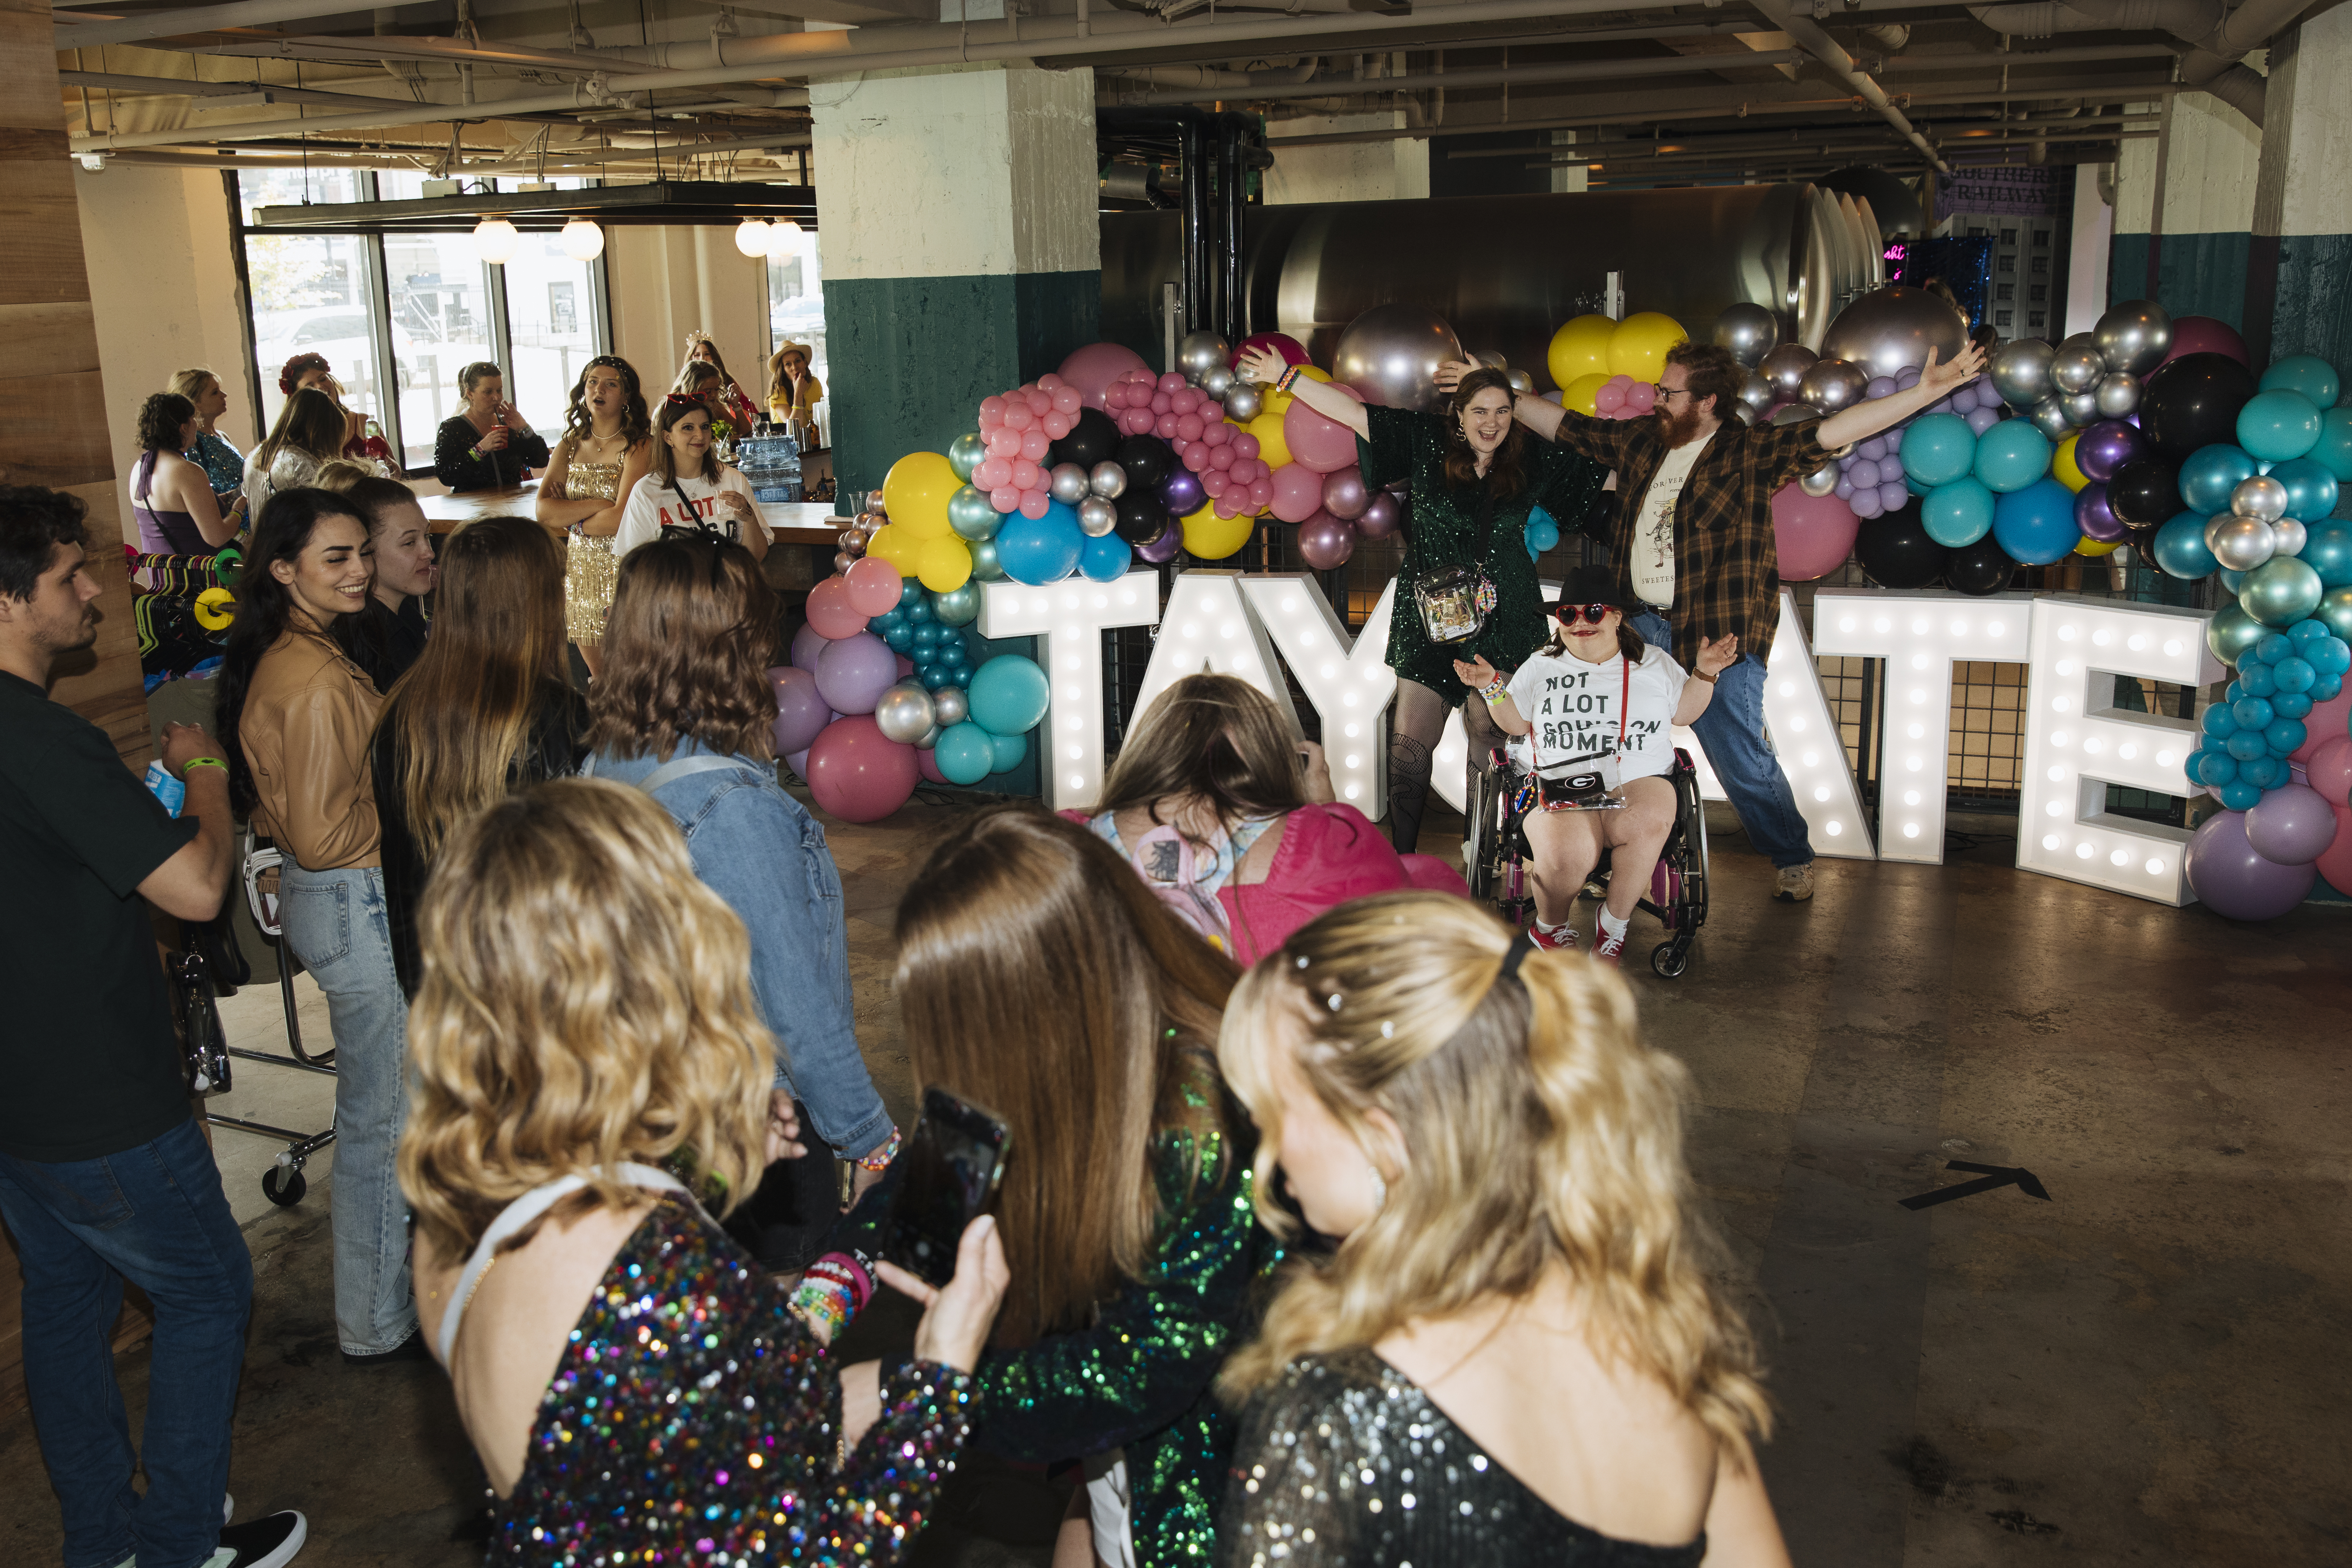 Tay-gates Offer Taylor Swift Fans A Pre-Concert Party HuffPost Entertainment image